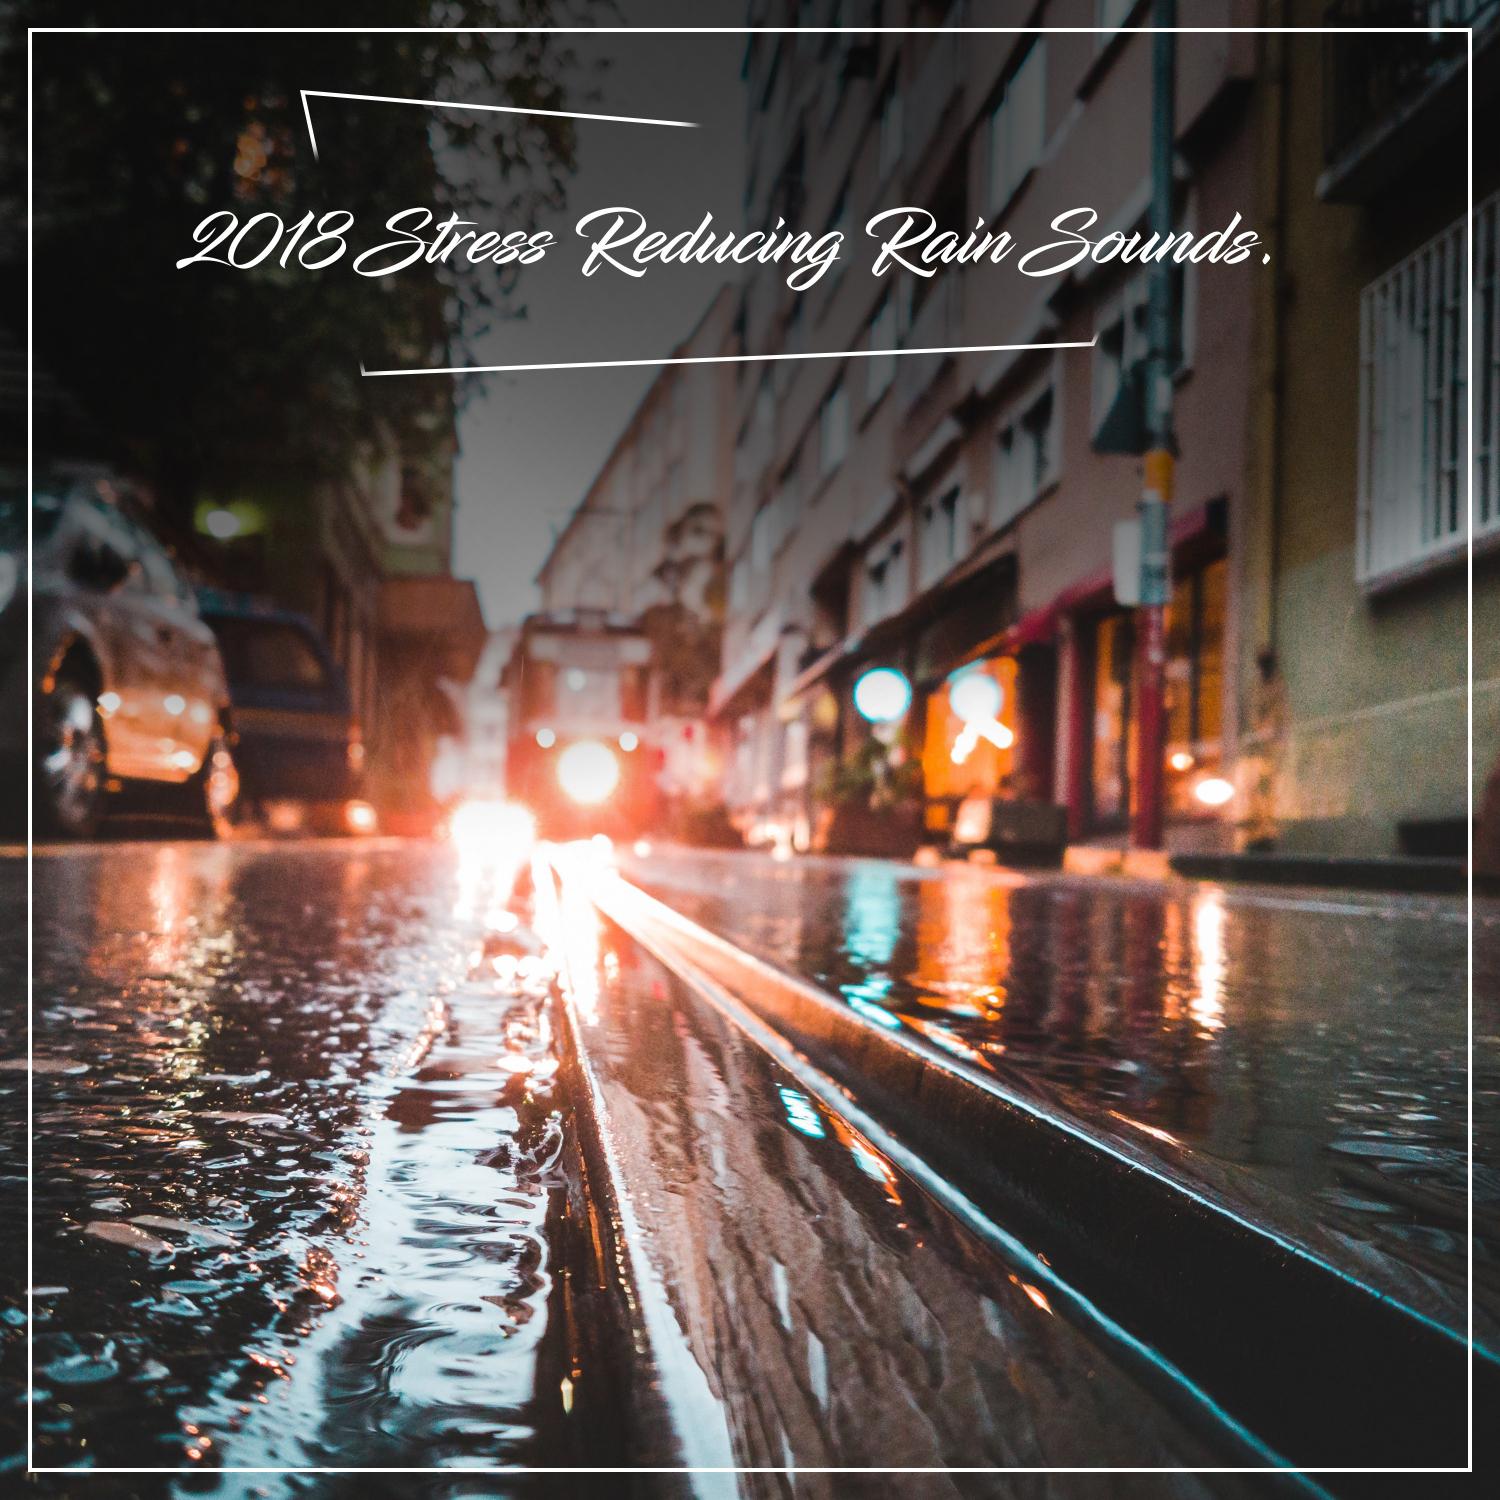 2018 Stress Reducing and Meditation Enabling Rain Sounds.